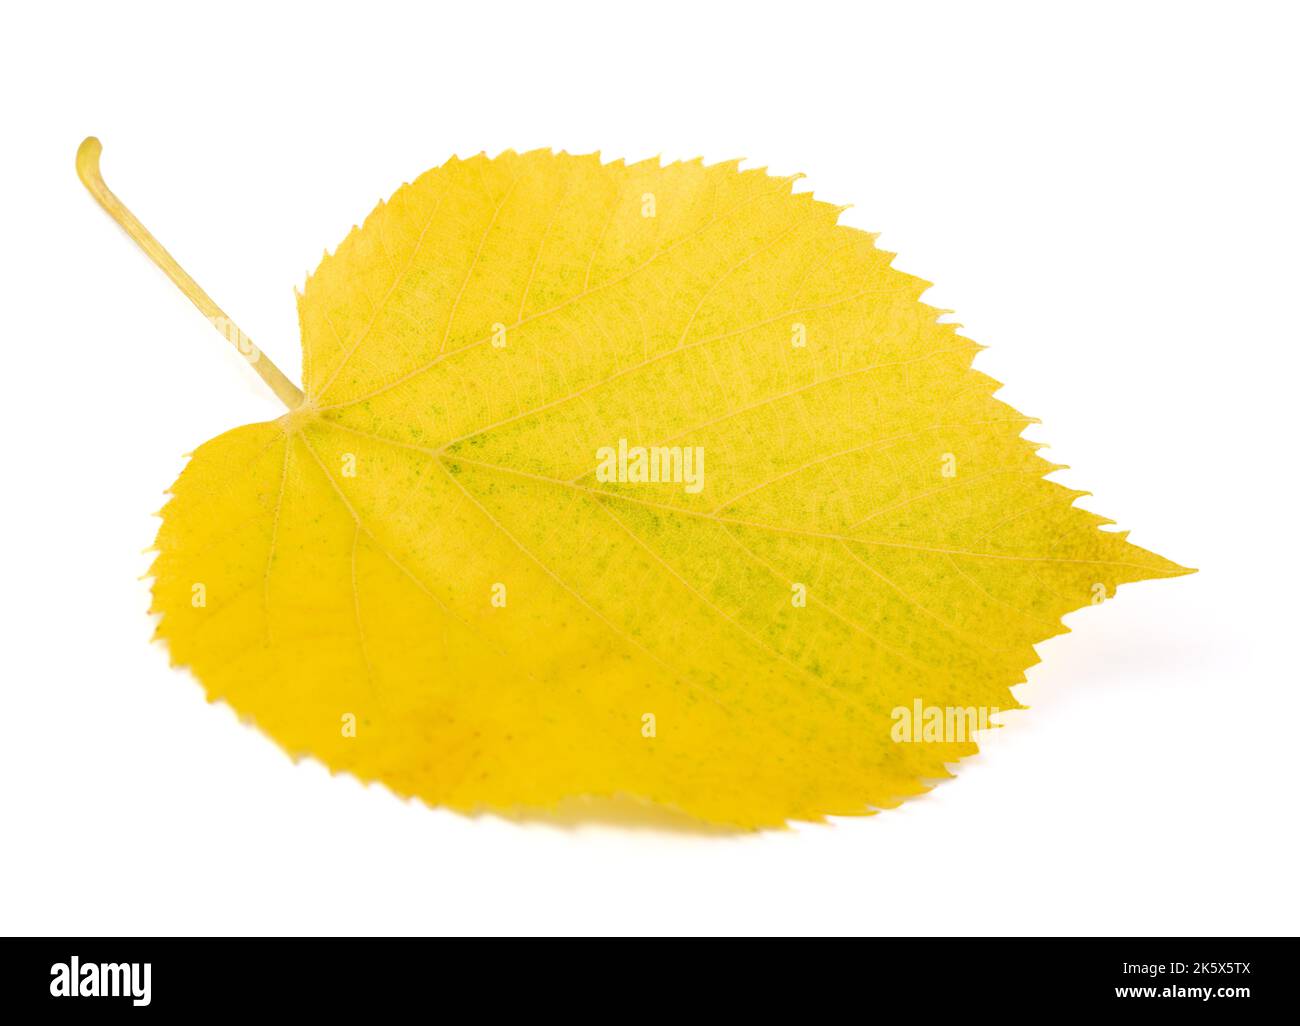 Dried Linden leaf isolated on white background Stock Photo